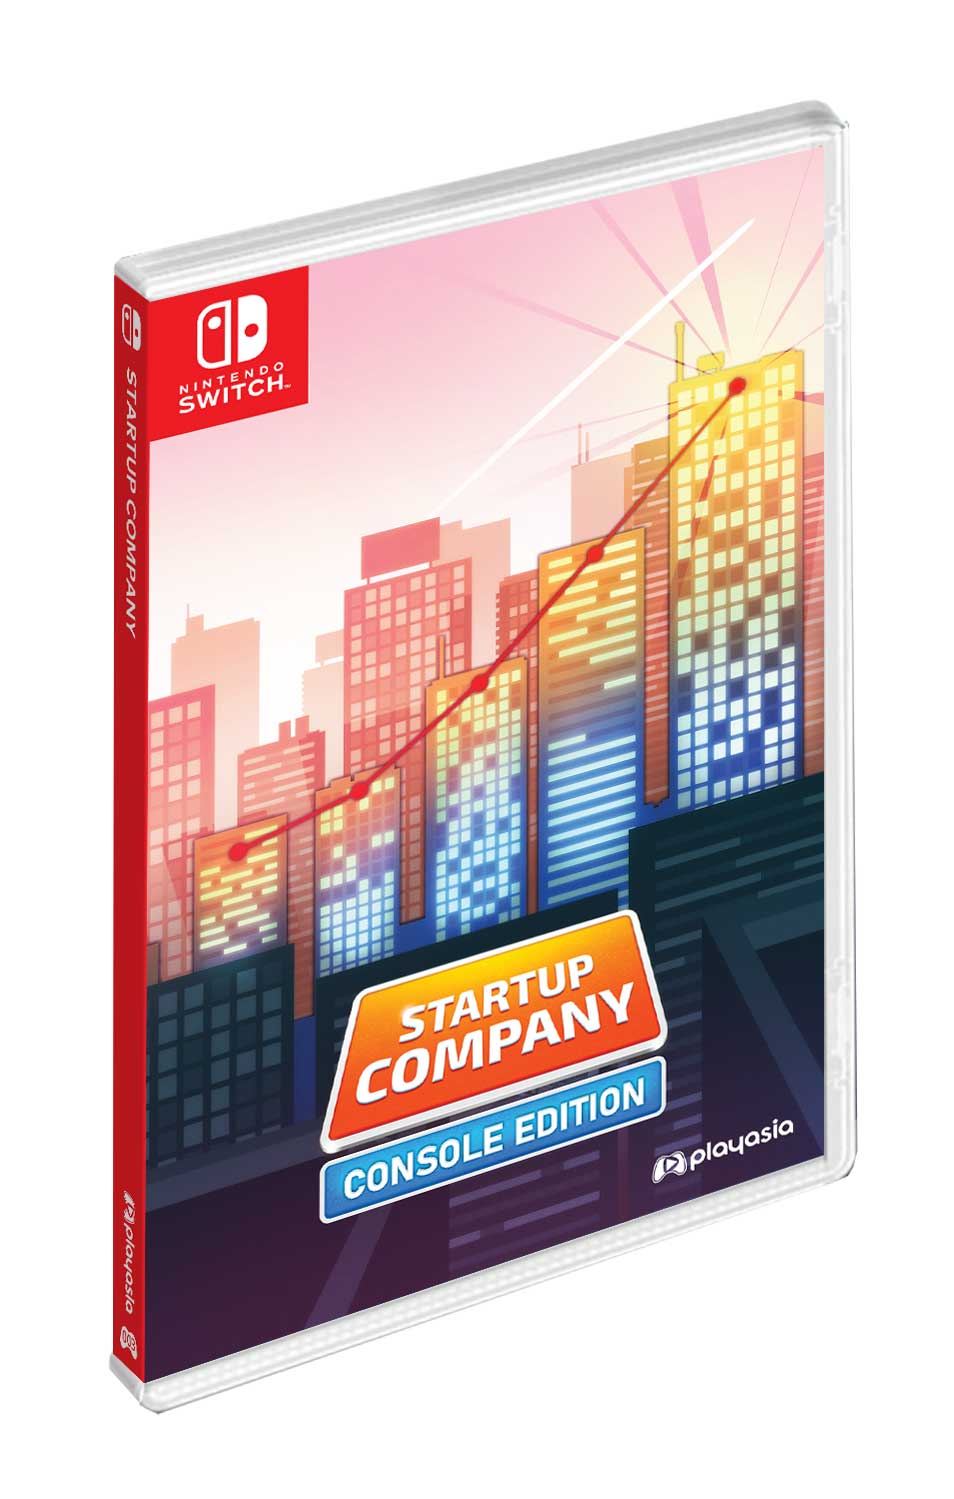 Startup Company Console Edition(Limited) 家庭用ゲームソフト 最新な